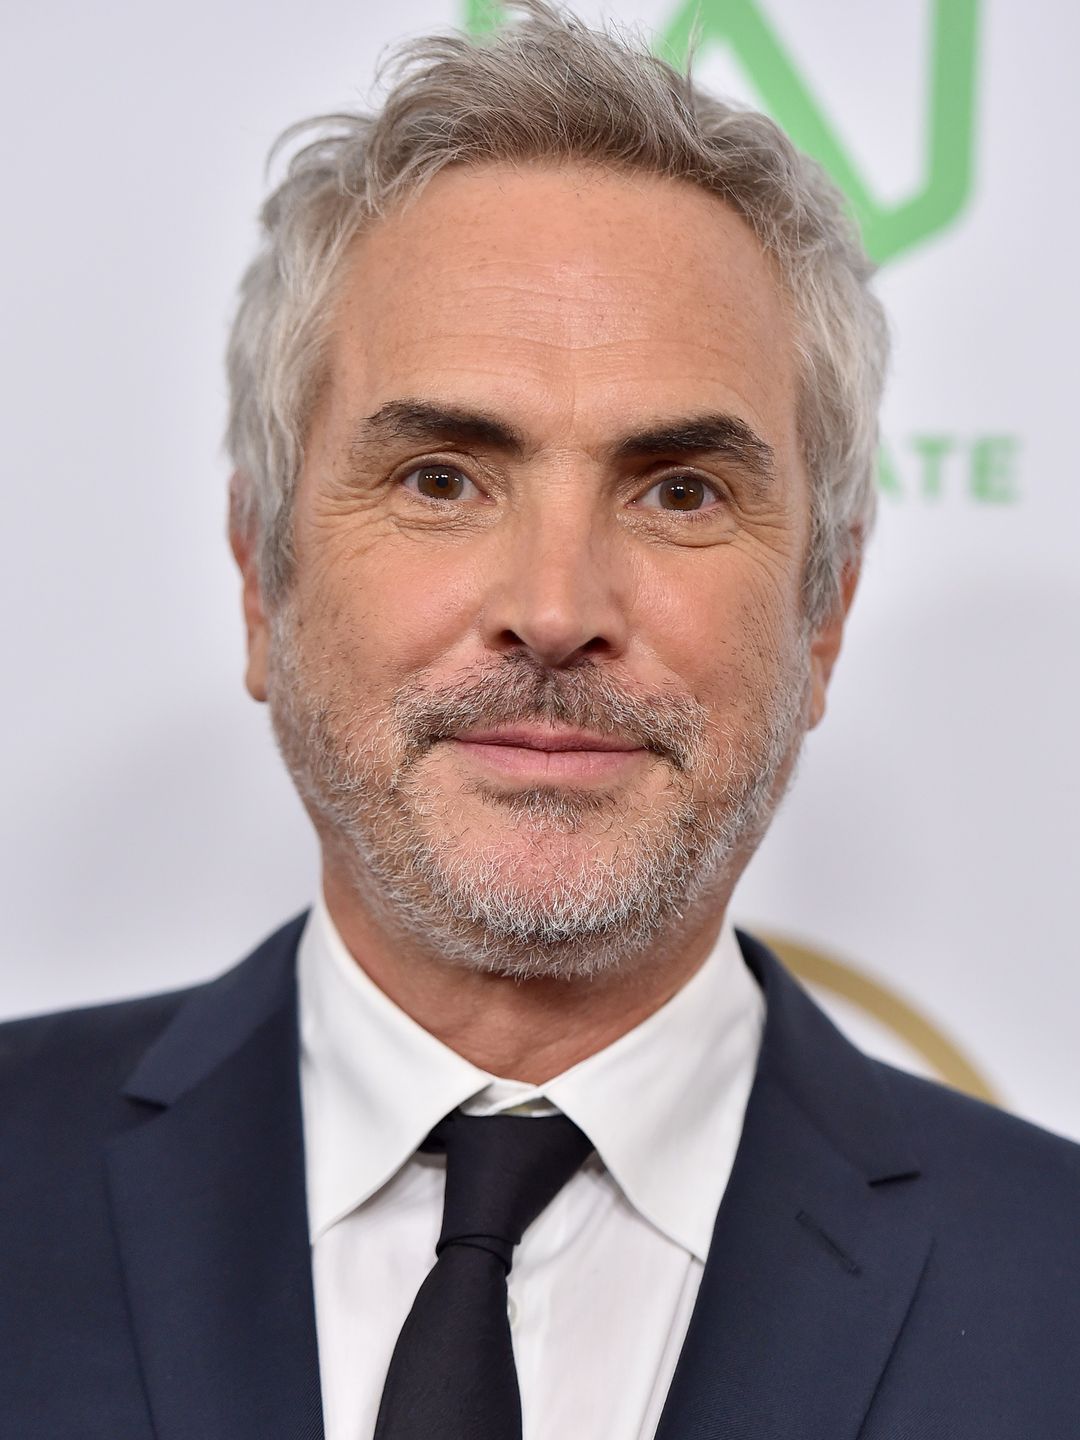 Alfonso Cuarón personal traits